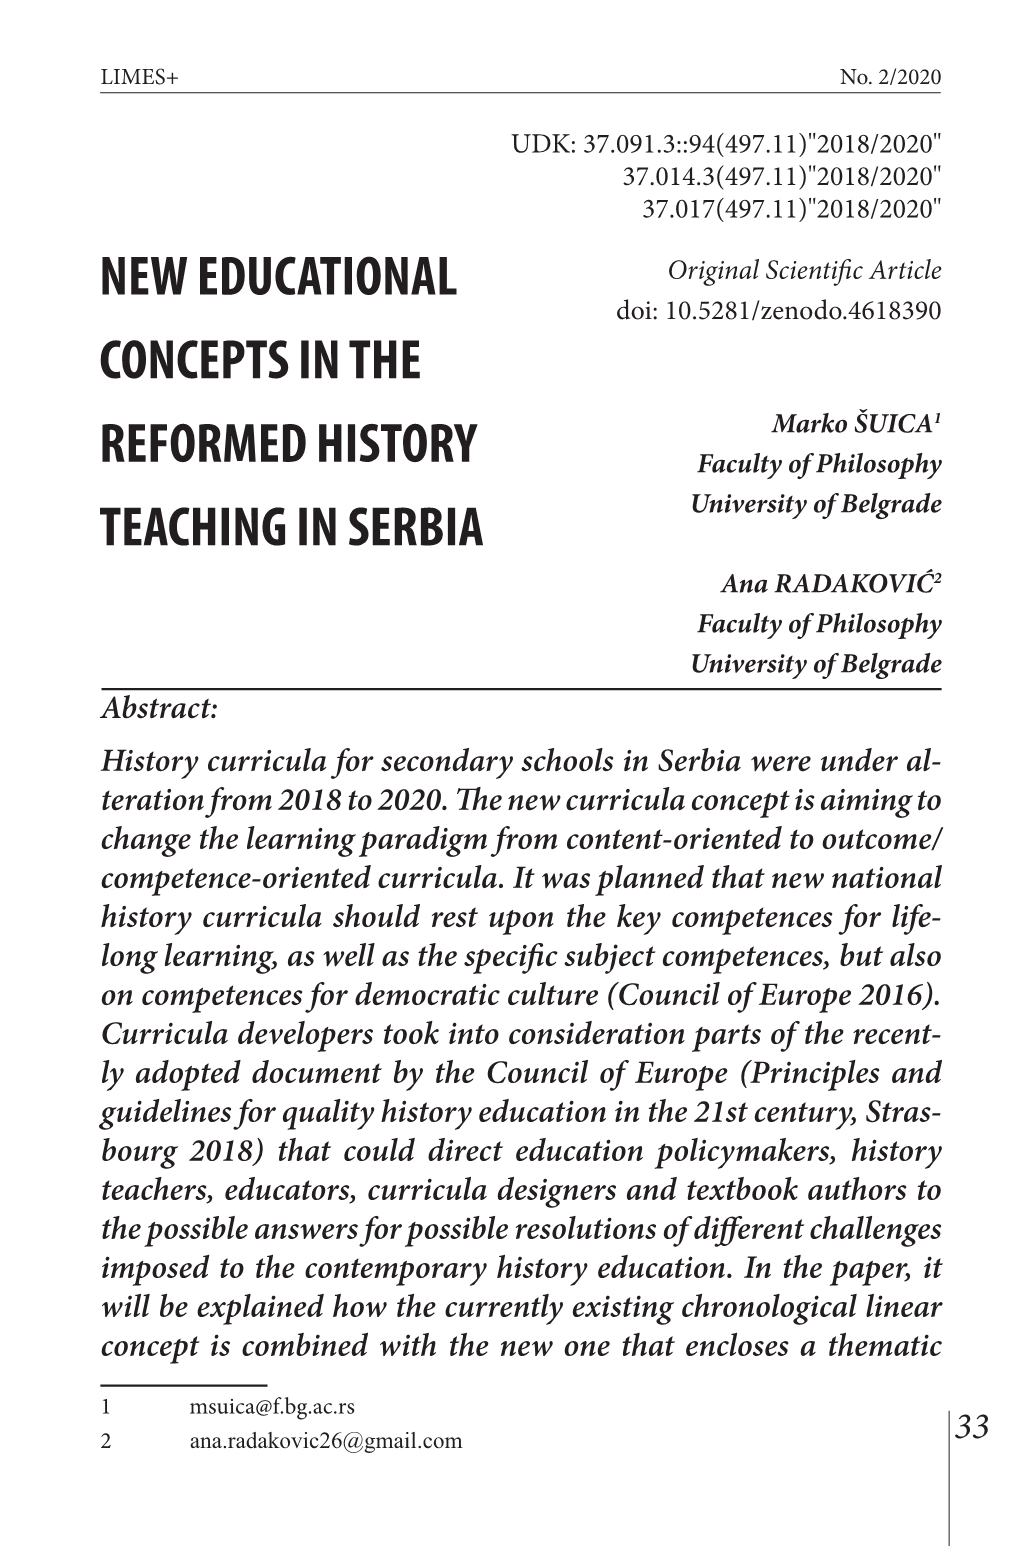 New Educational Concepts in the Reformed History Teaching